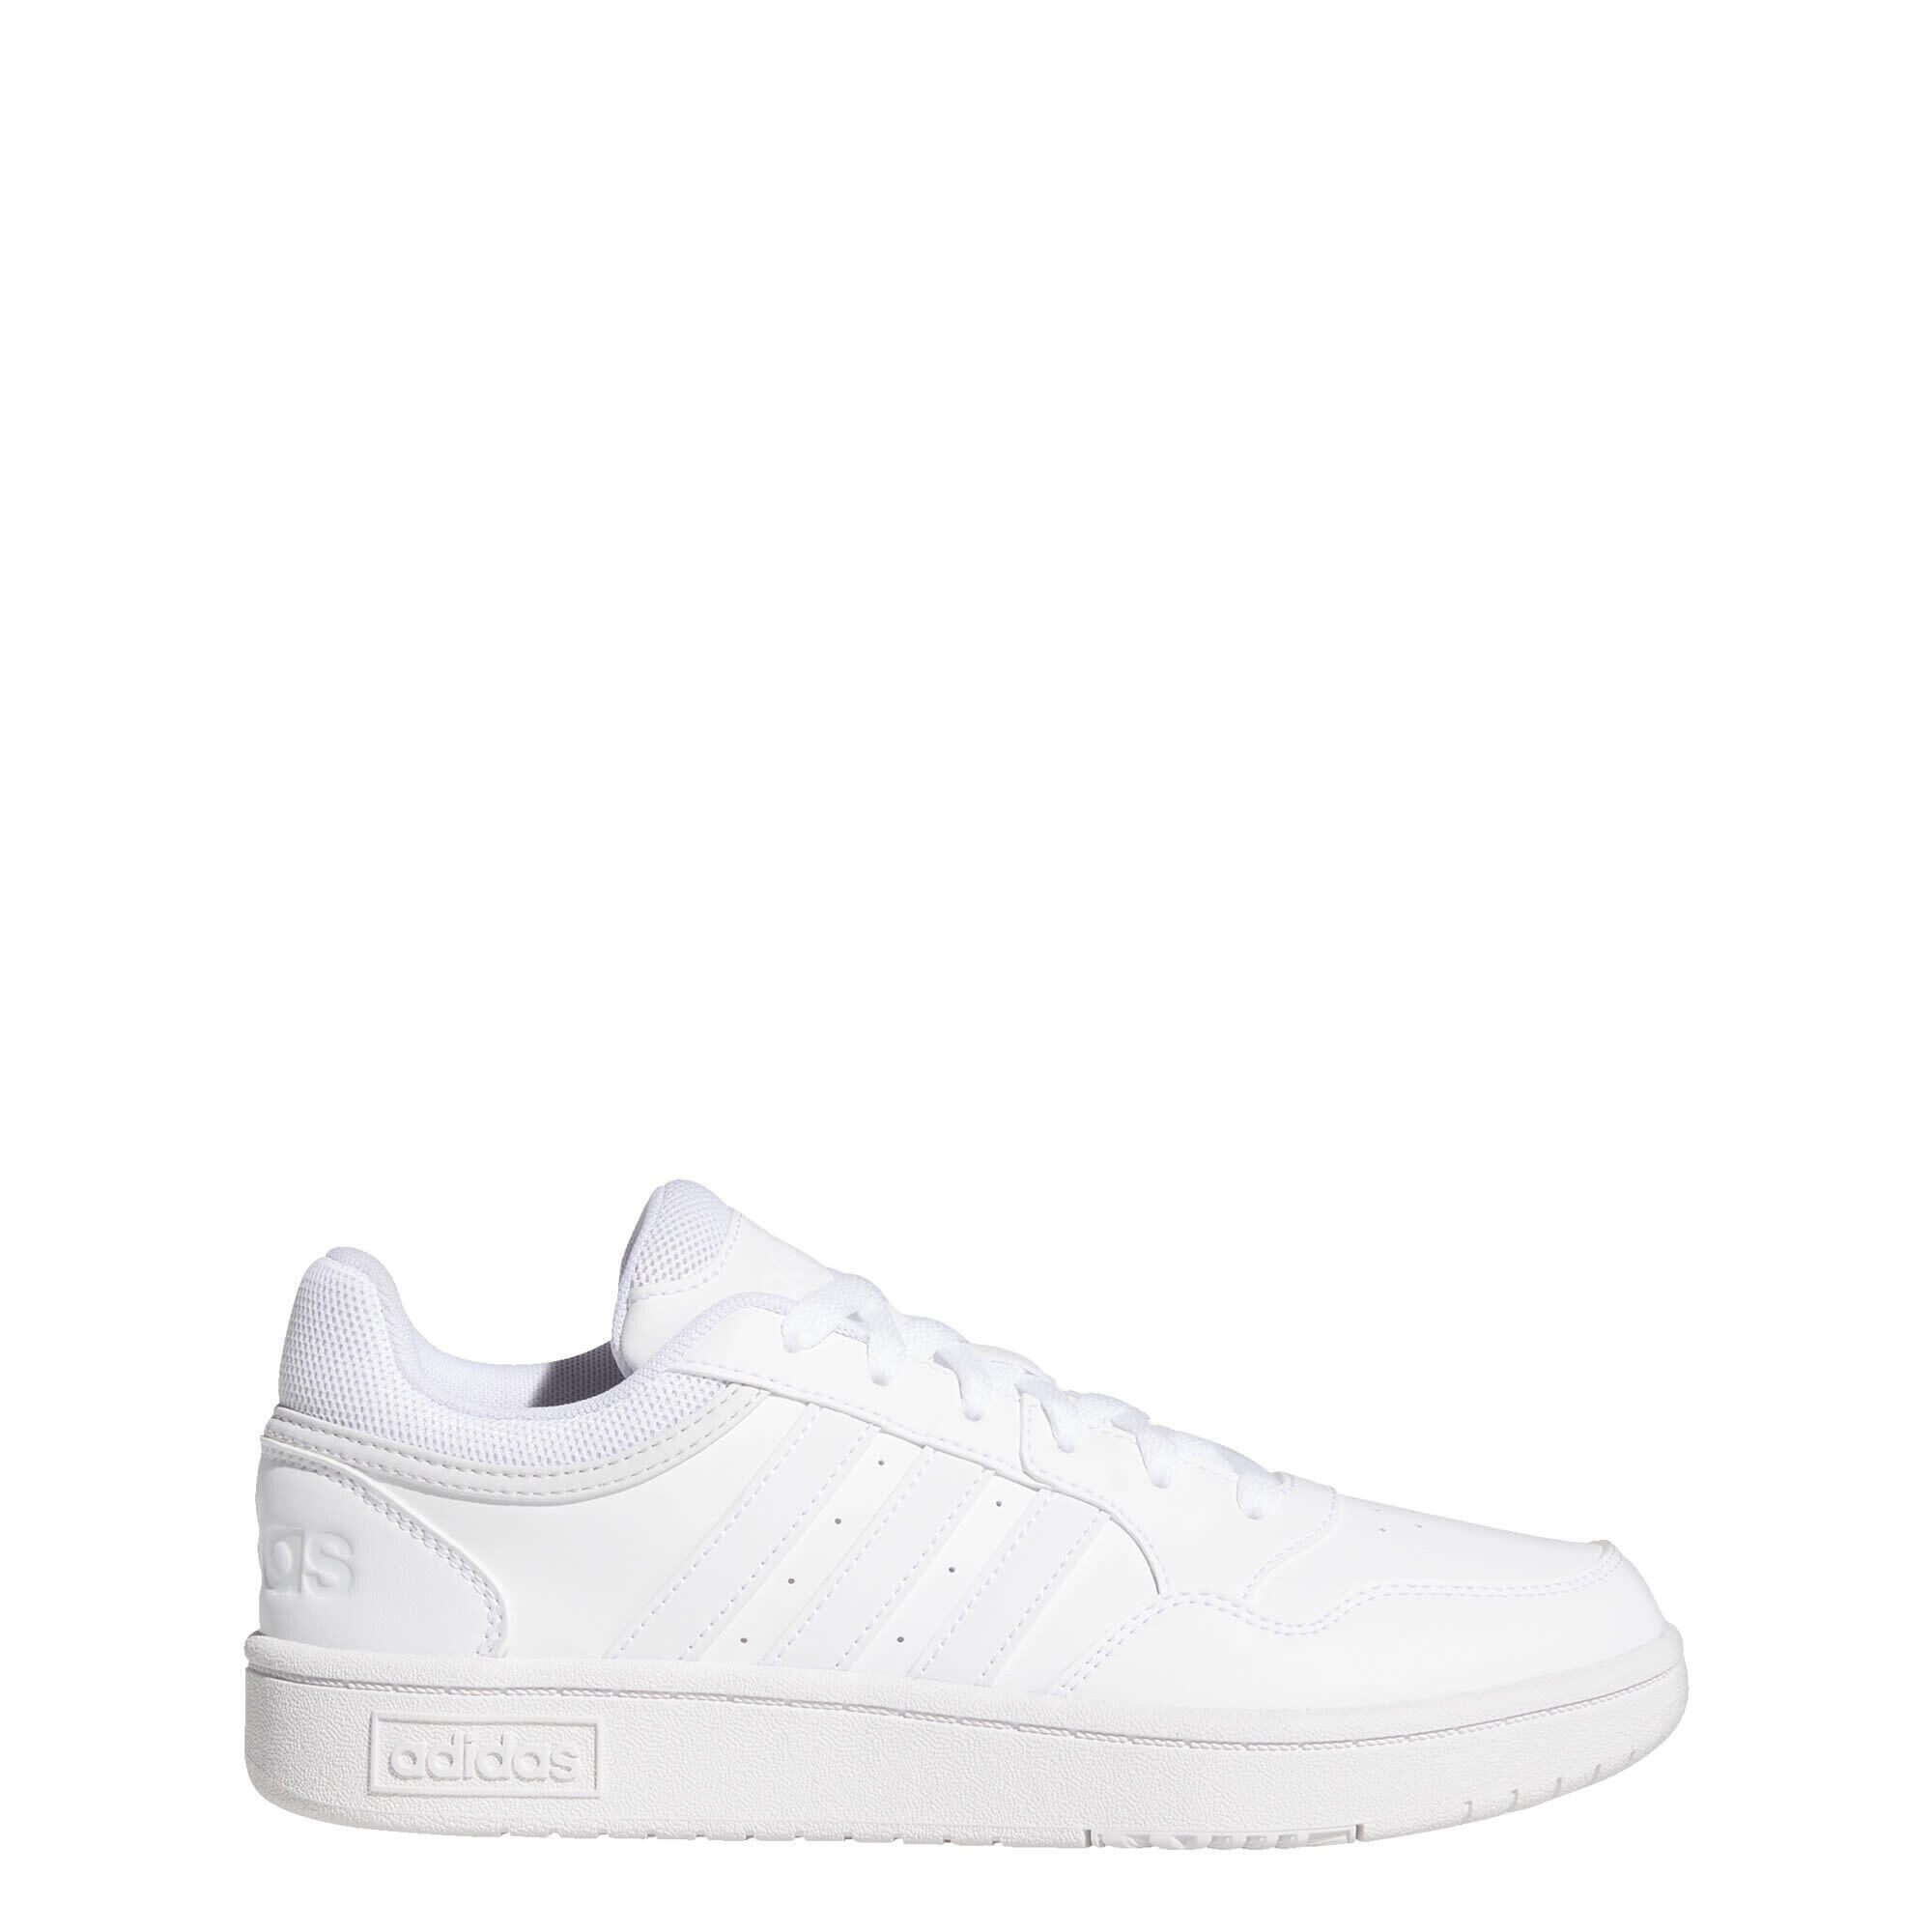 ADIDAS Hoops 3.0 Low Classic Shoes